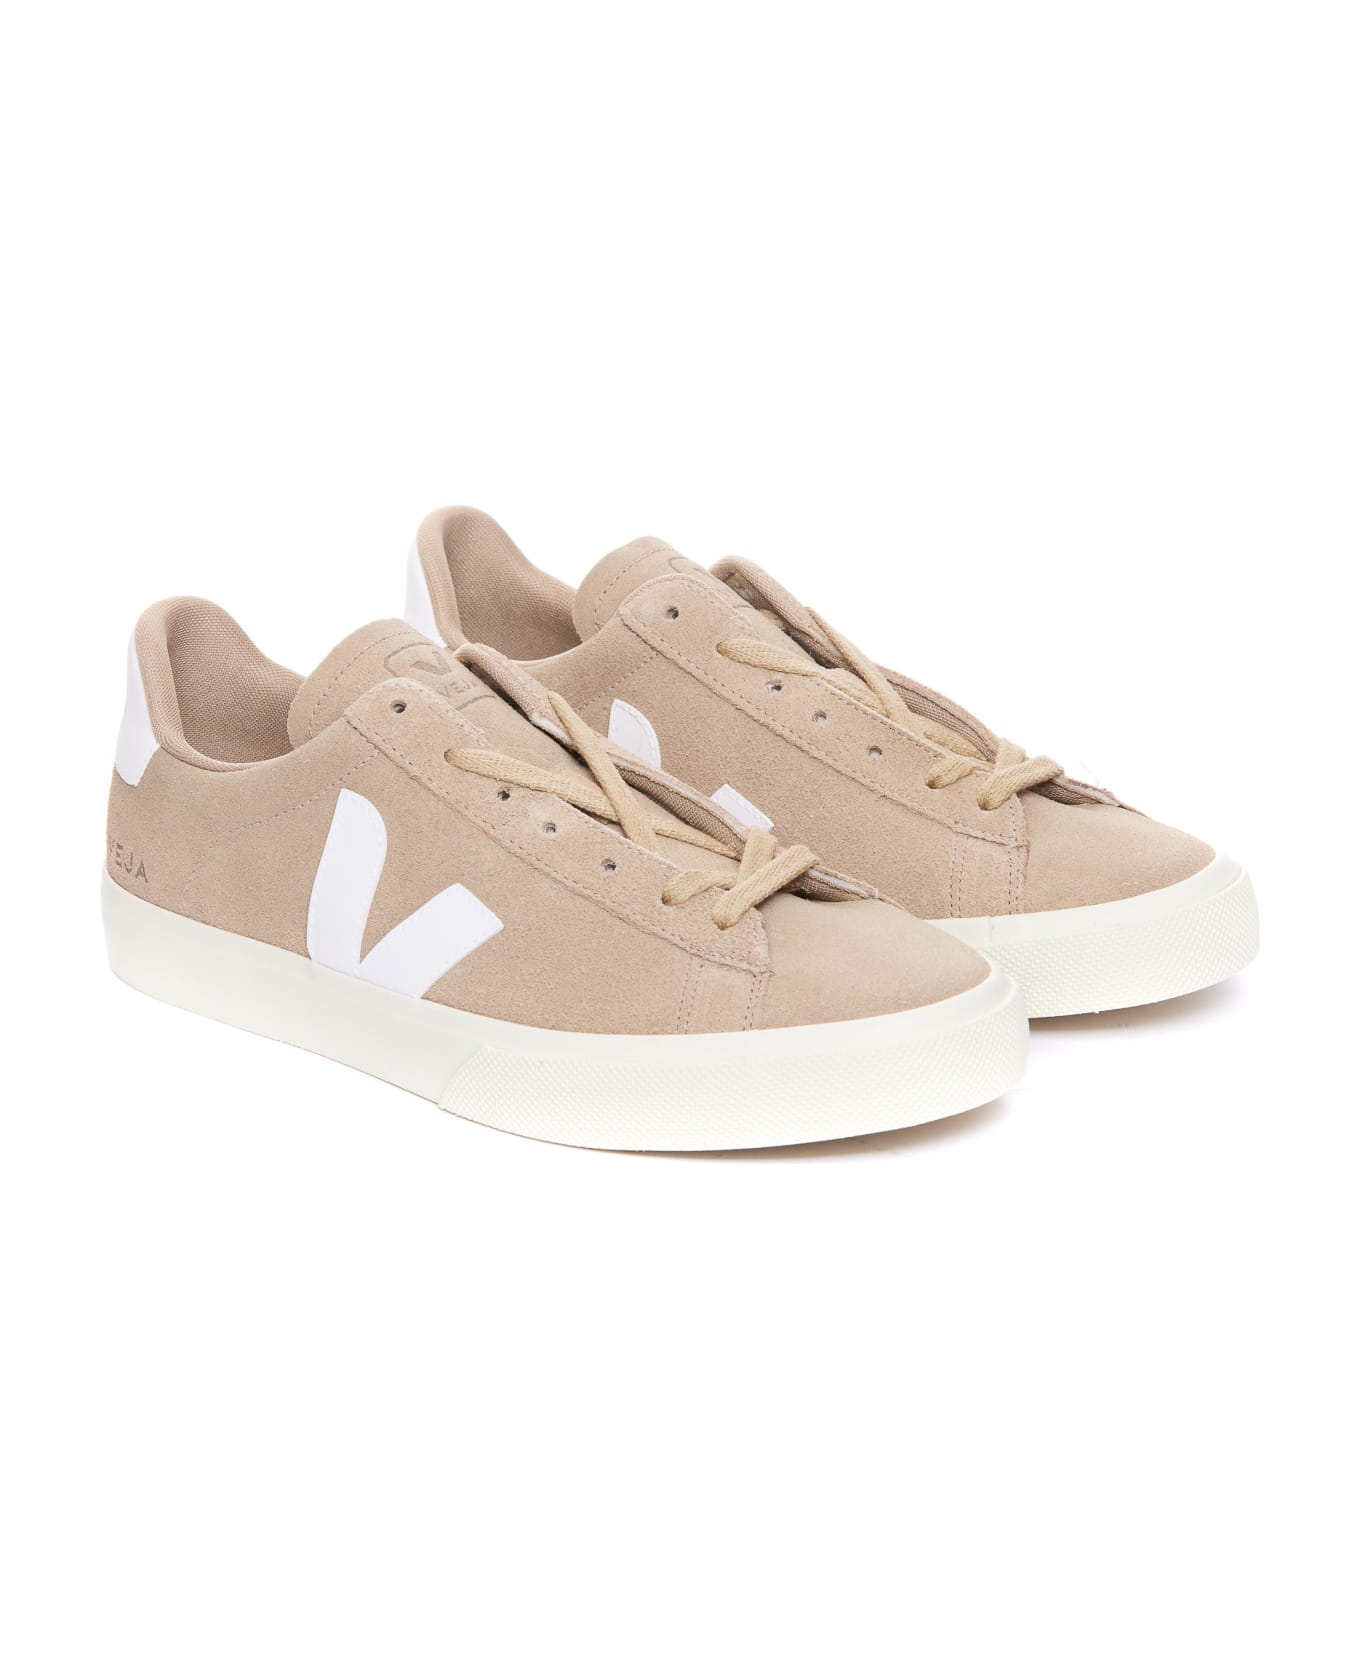 Veja Campo Suede Sneakers - DUNE_WHITE